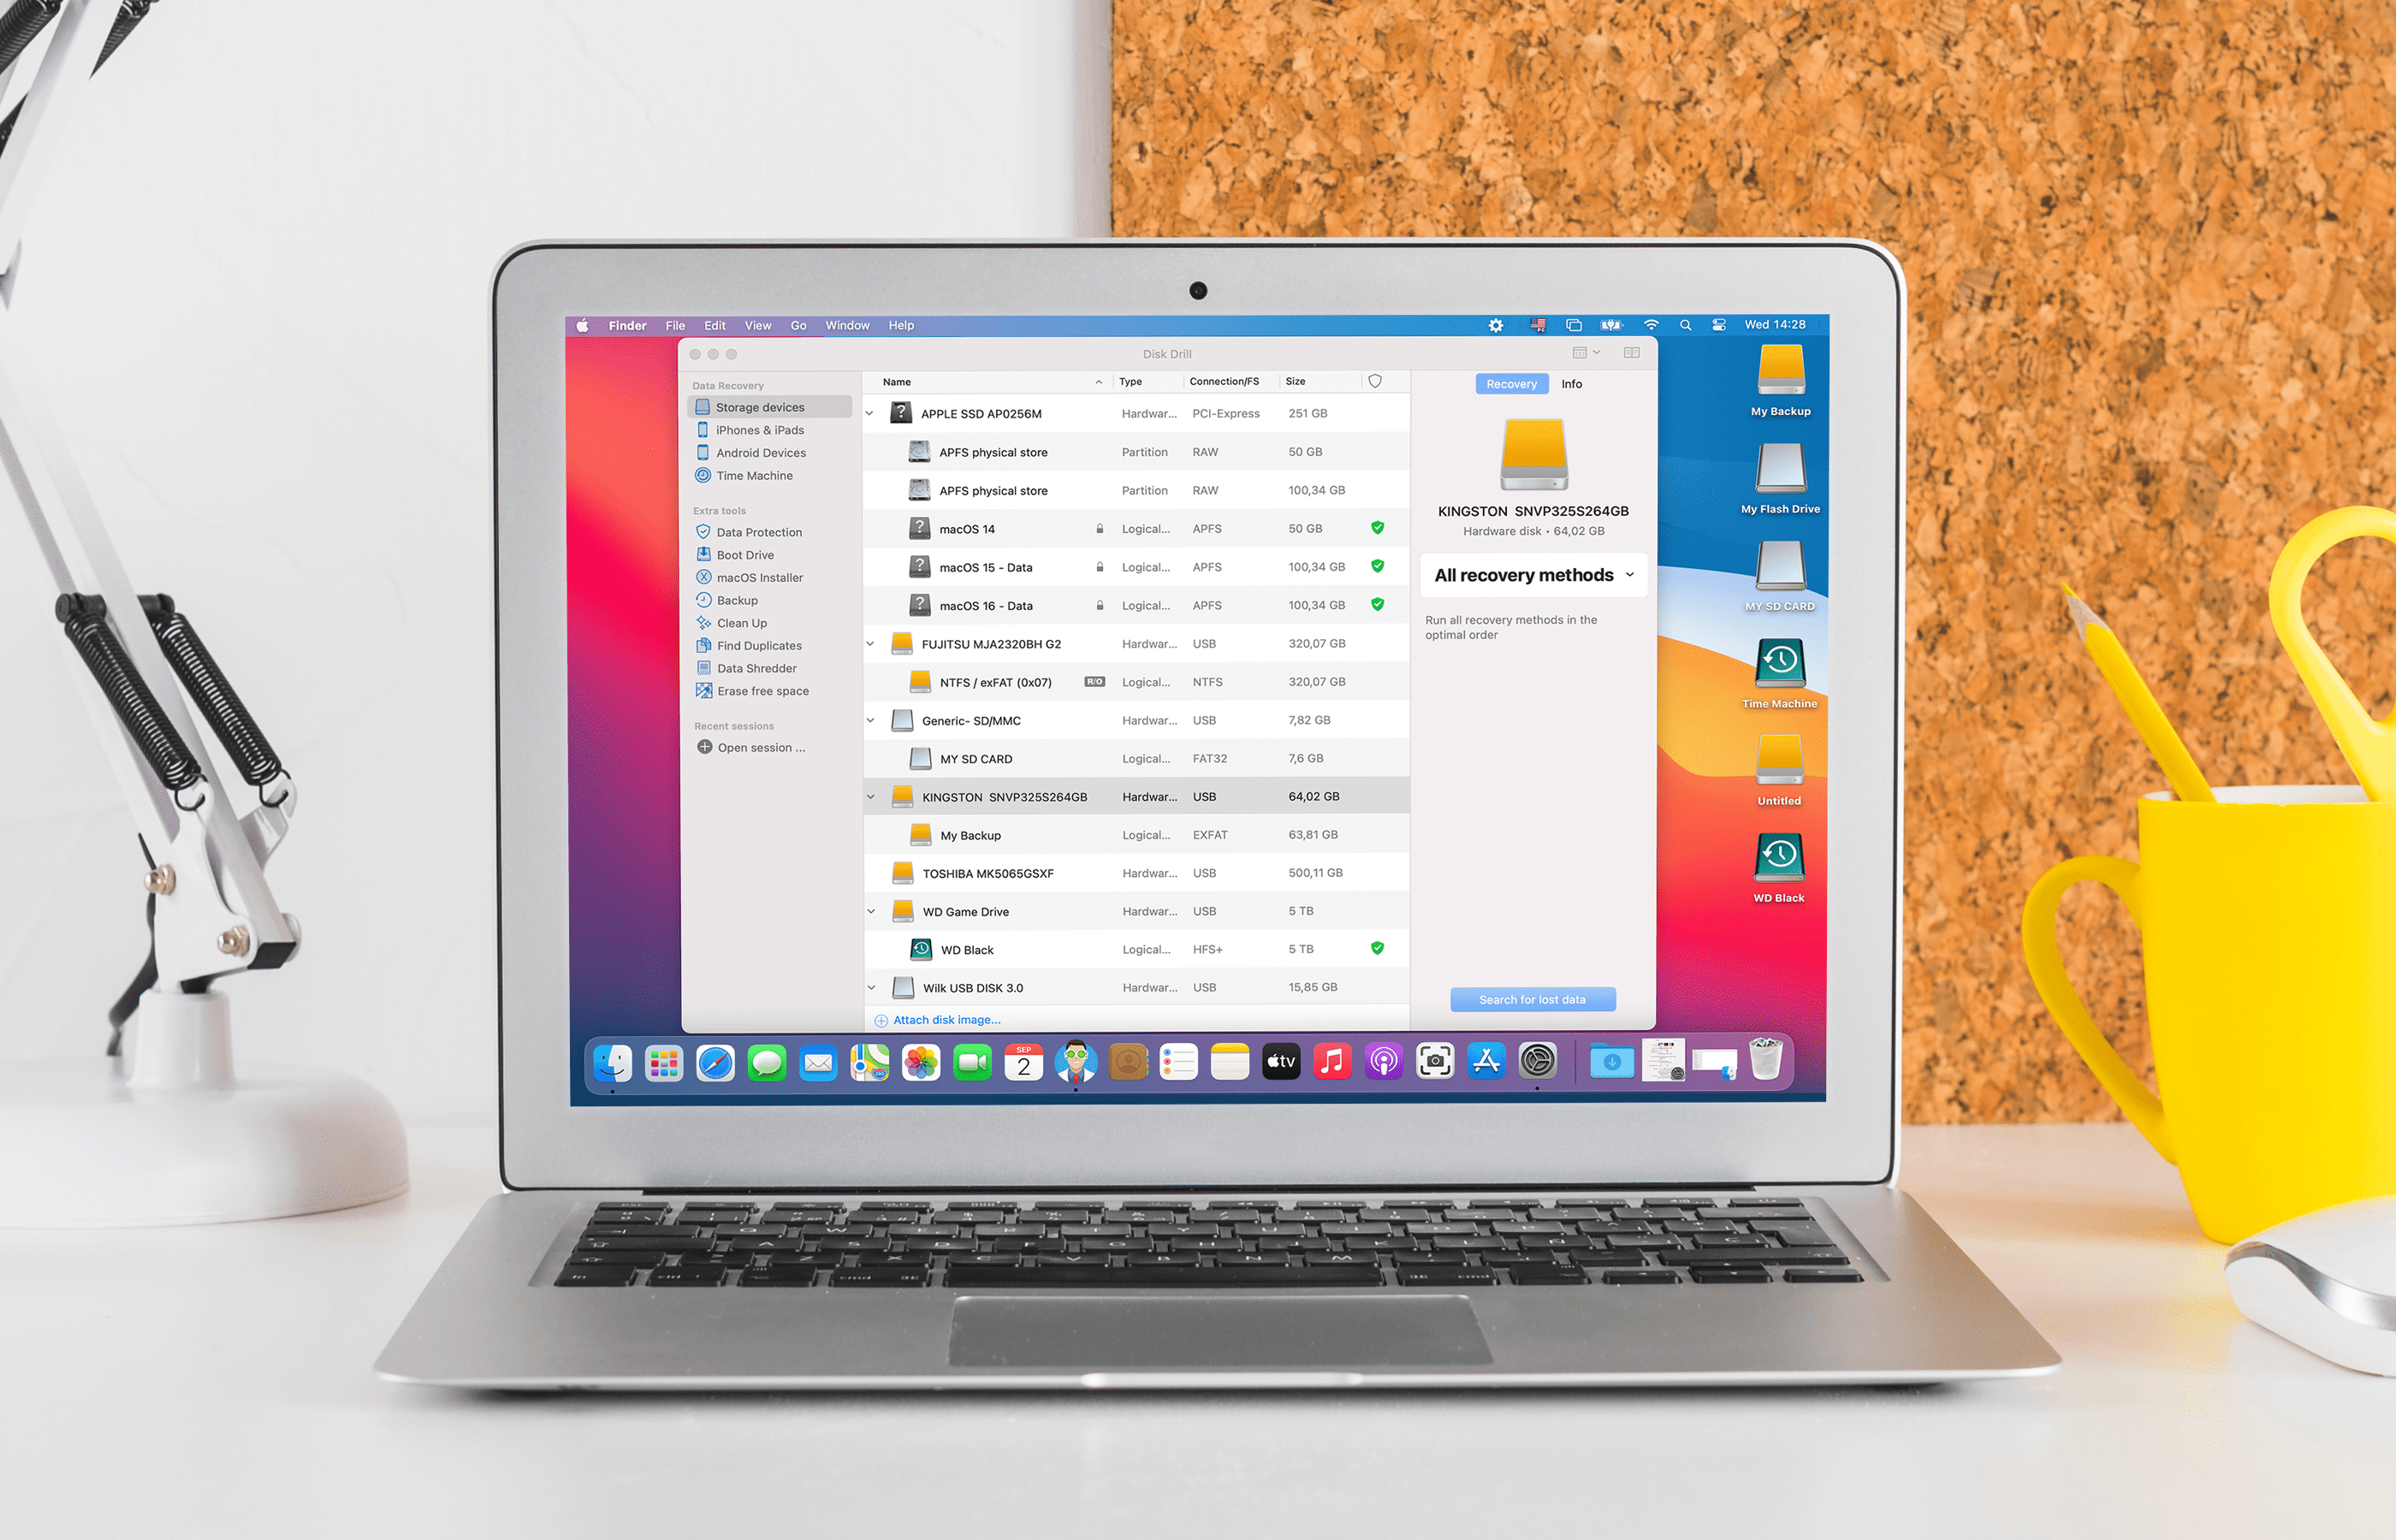 disk drill data recovery mac